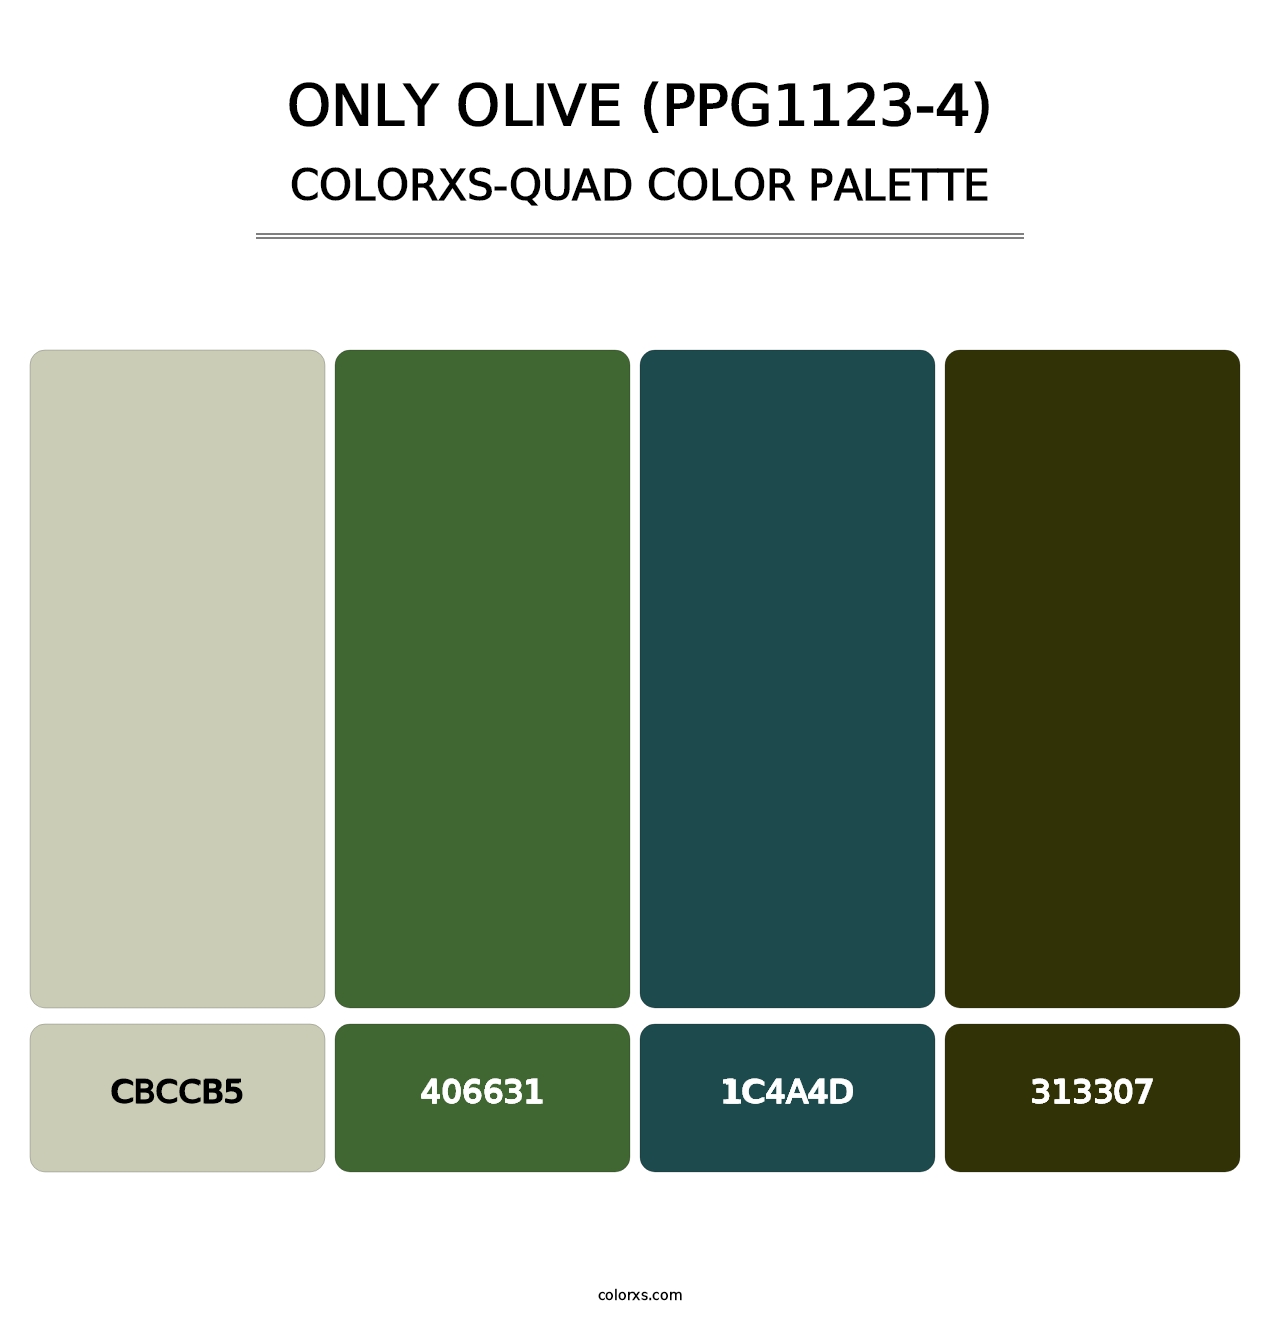 Only Olive (PPG1123-4) - Colorxs Quad Palette